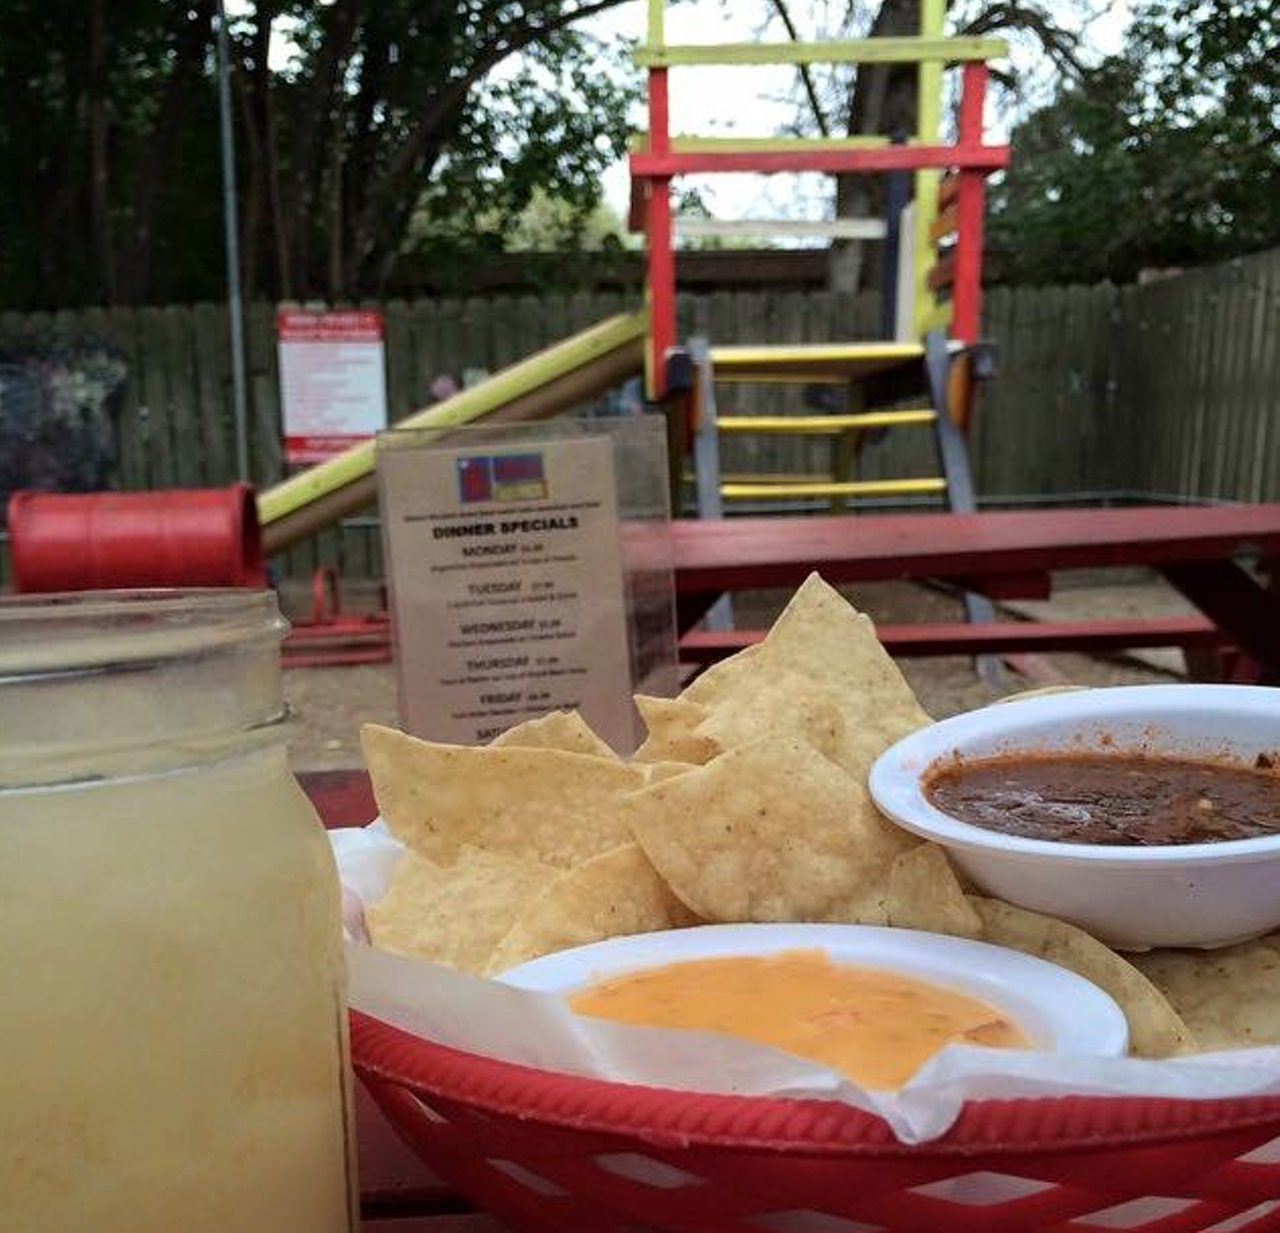  Beto's Alt-Mex
8142 Broadway, (210) 930-9393 
Tex-Mex cuisine, margaritas and an area for the kids &#151; what more could you ask for?
Photo via Facebook/Beto's Alt-Mex